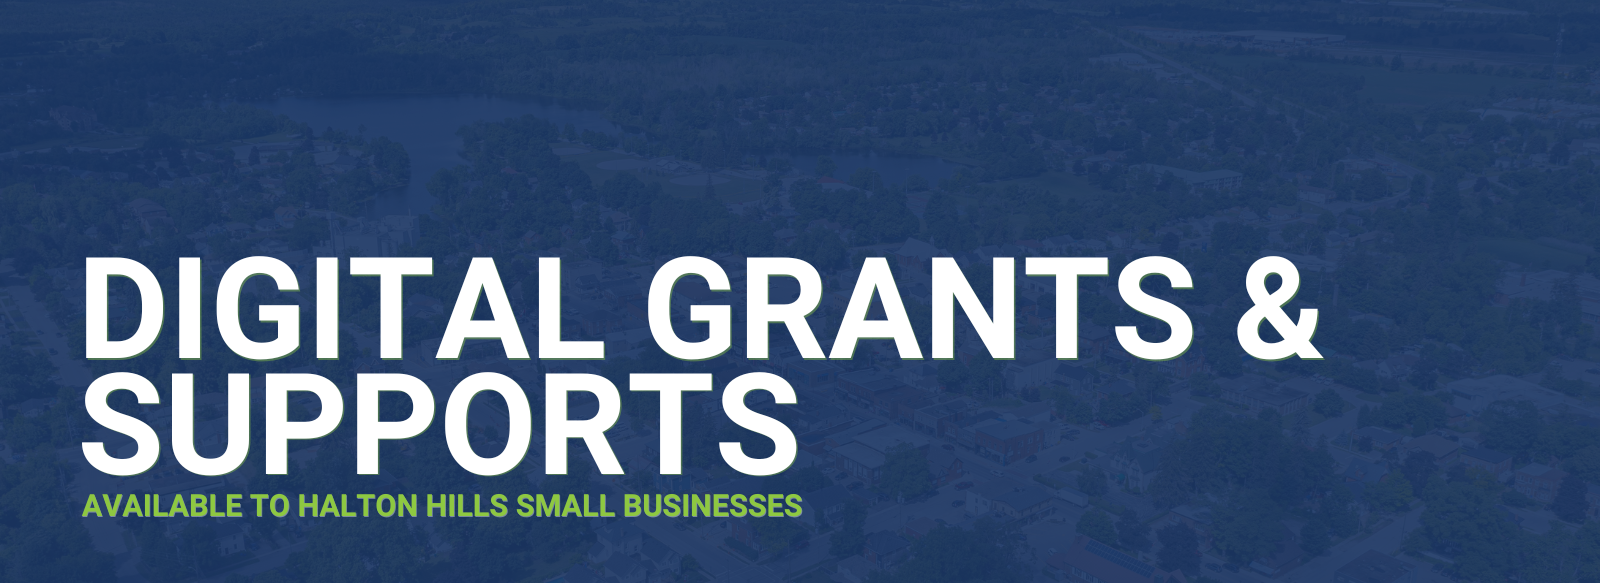 Aerial city view with dark blue overlay blue and white text stating: Digital Grants and Supports Available to Halton Hills Small Businesses 